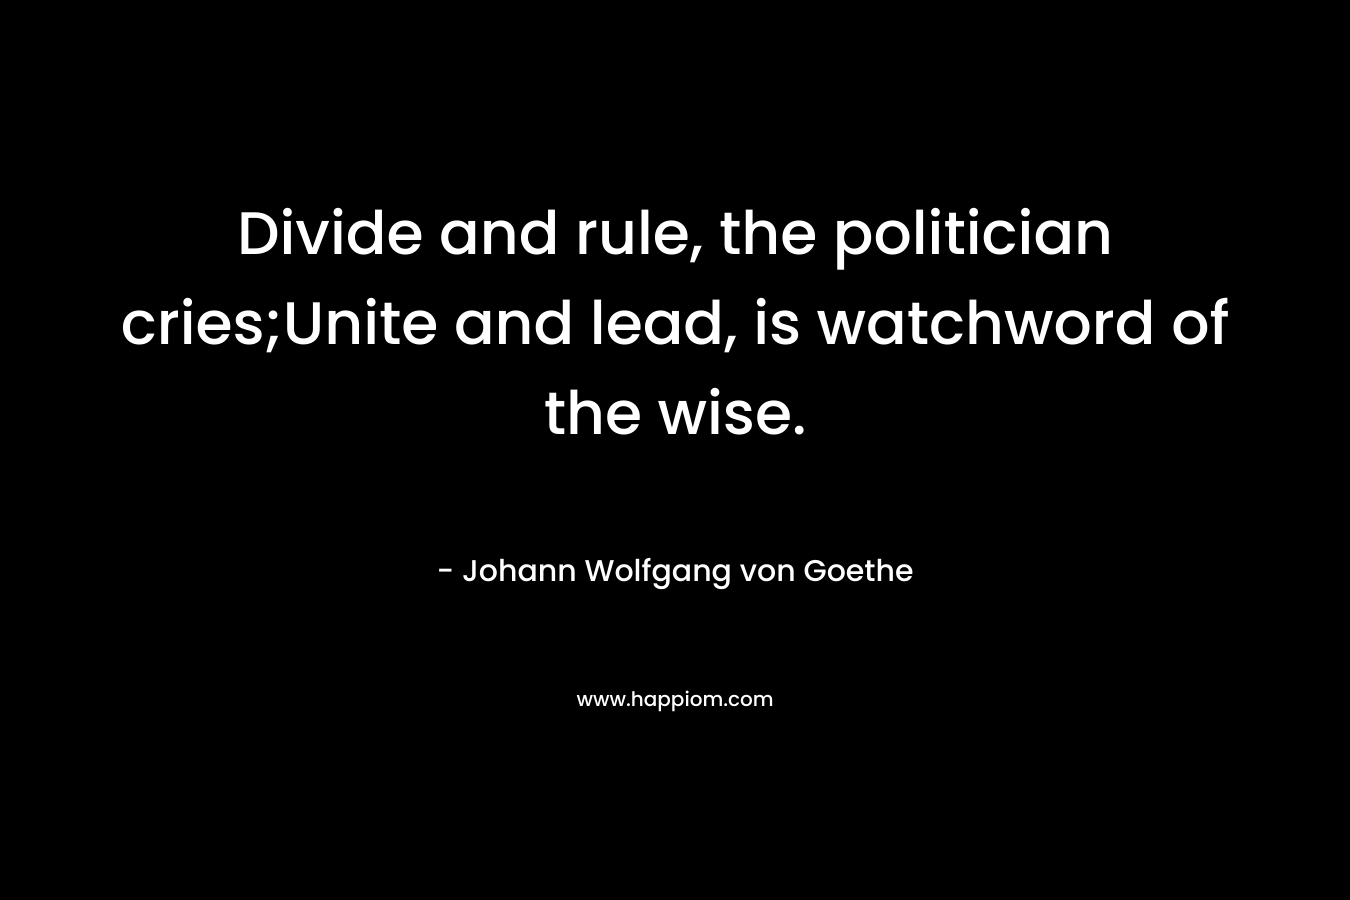 Divide and rule, the politician cries;Unite and lead, is watchword of the wise. – Johann Wolfgang von Goethe